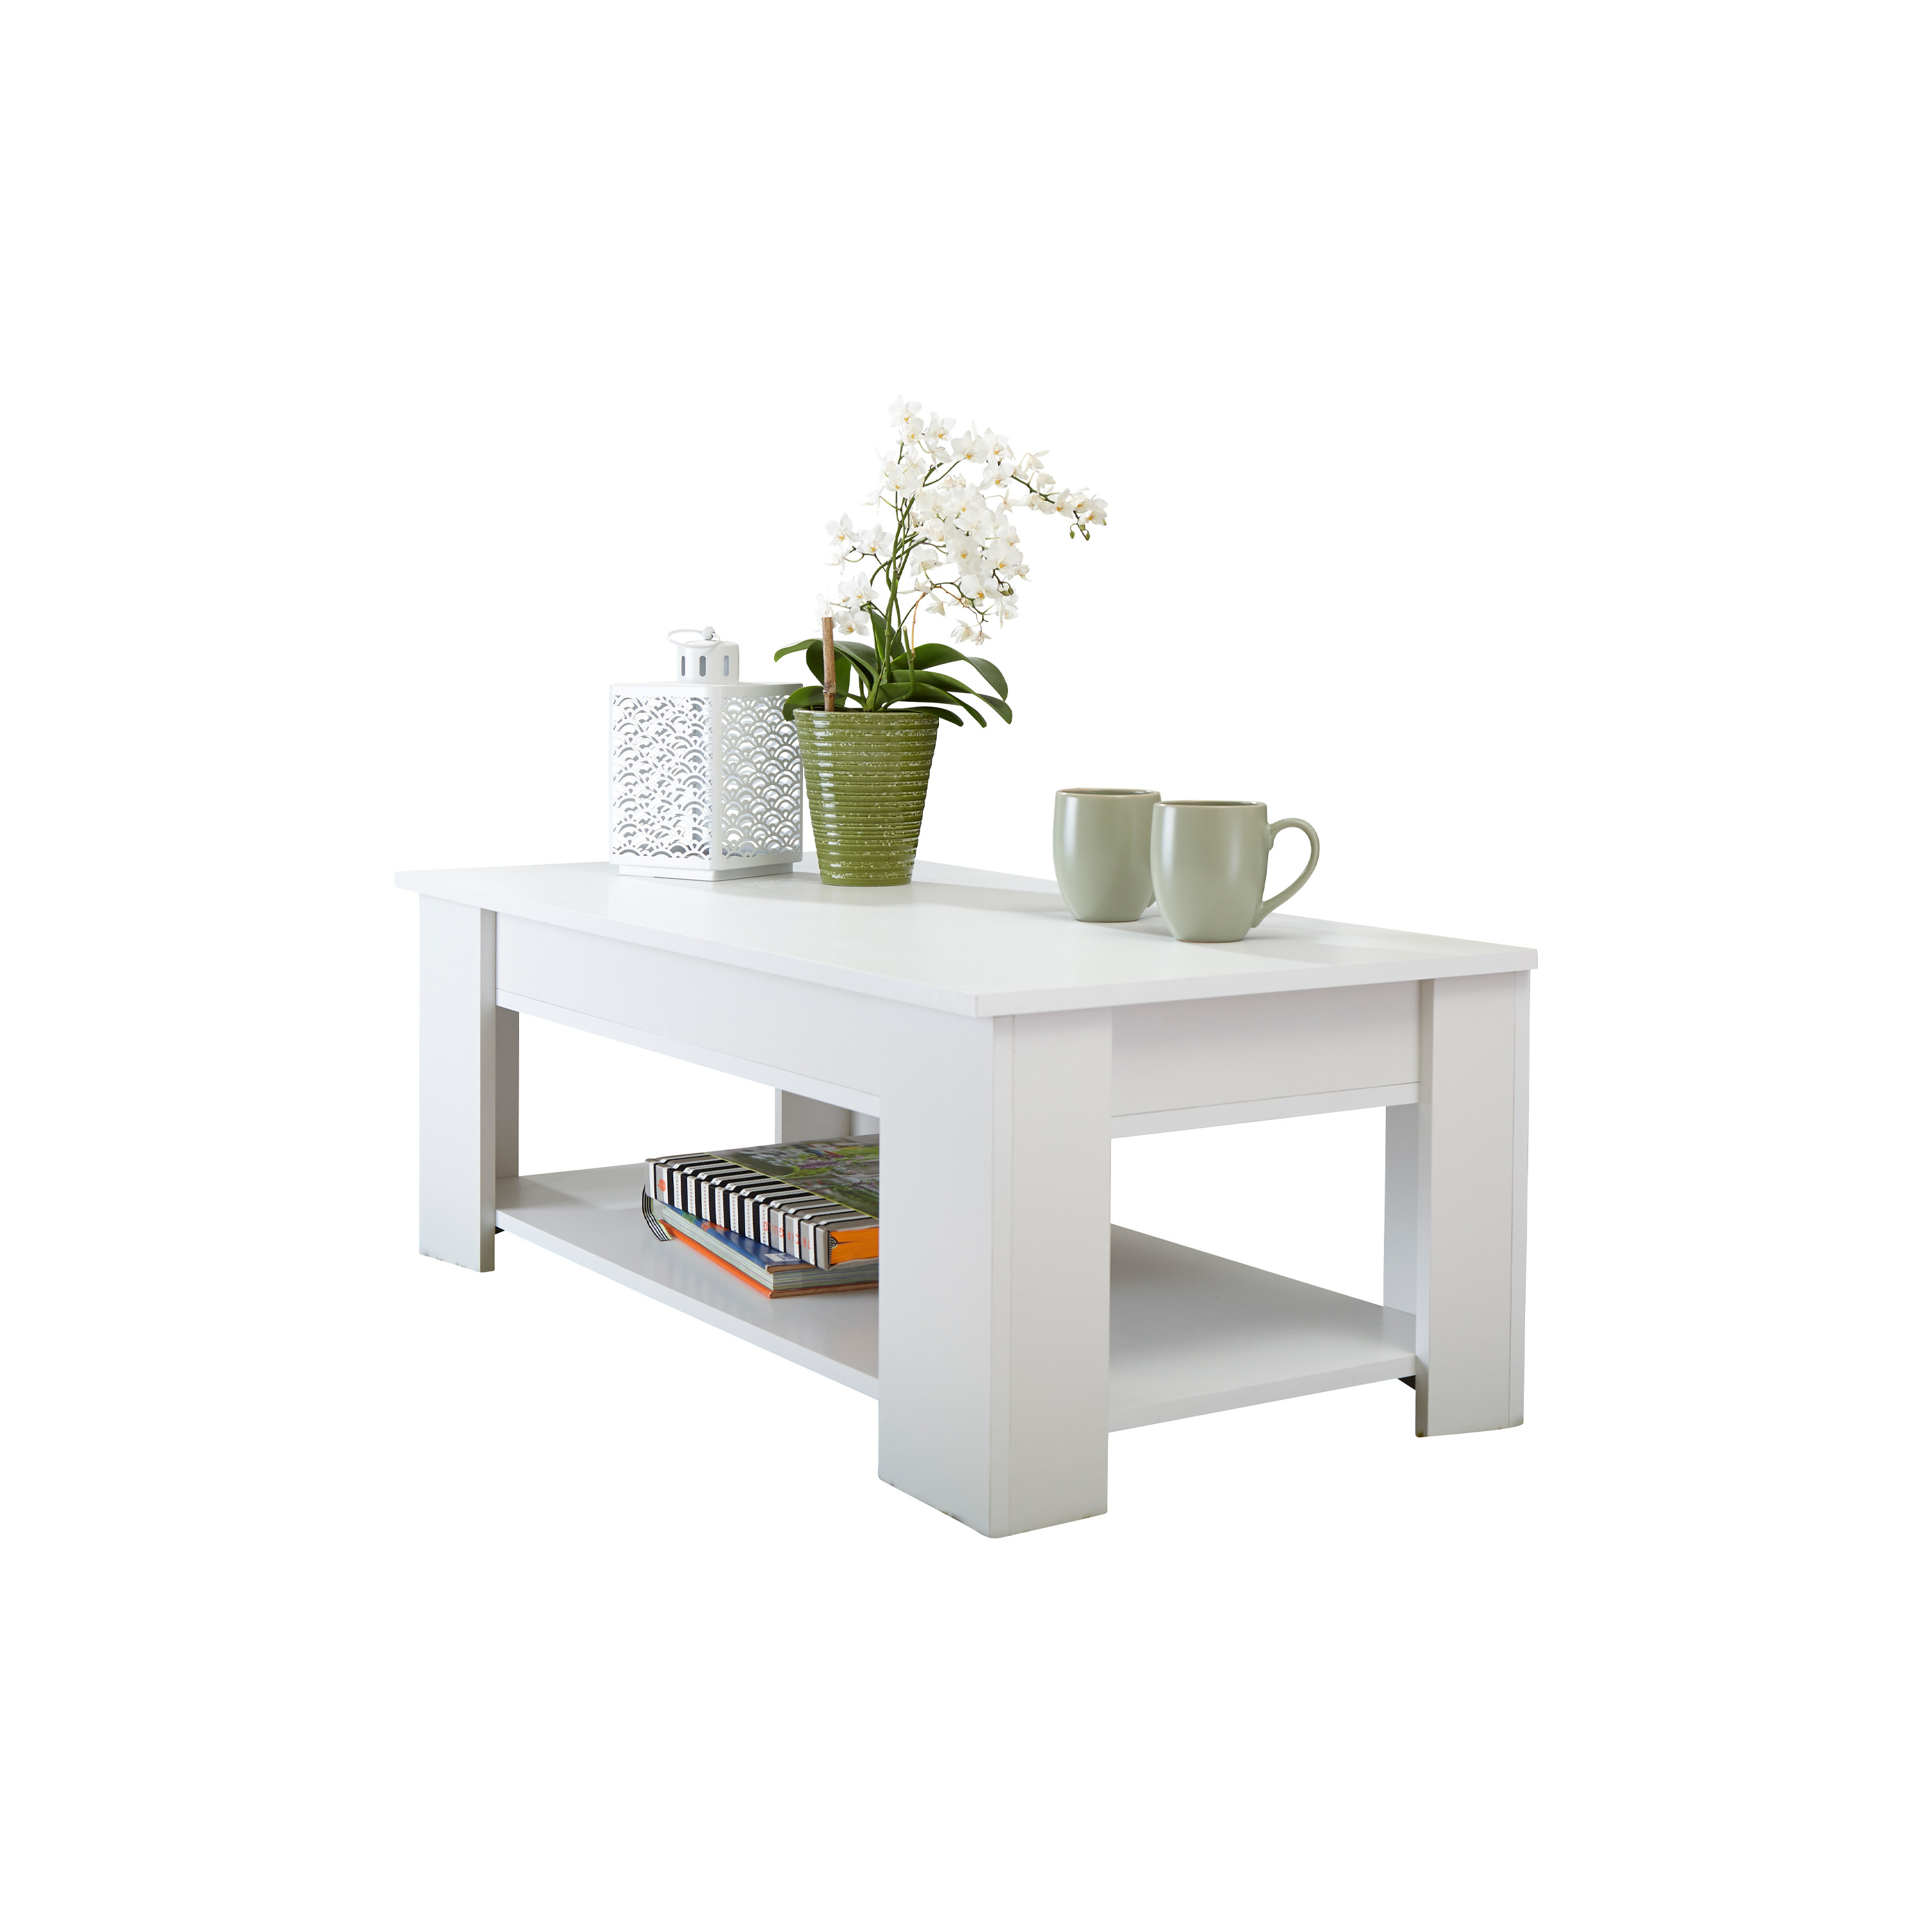 GFW Lift Up Coffee Table White - image 1